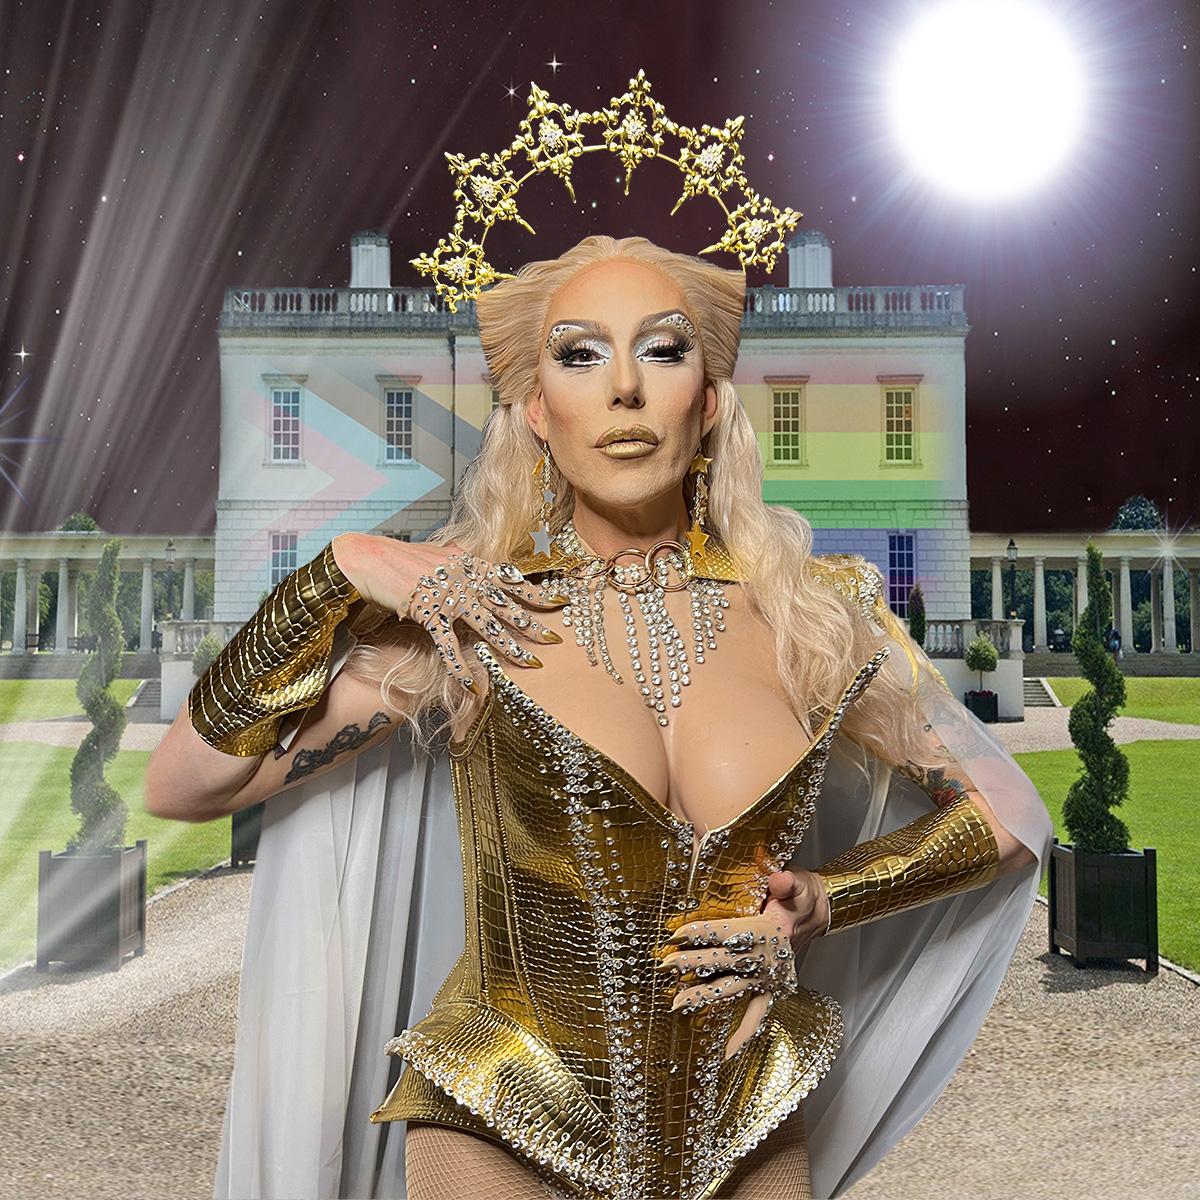 Dita Garbo stands majestically in front of the Queen's House wearing a gold corset and adorned with a crescent shaped gold crown and opulent necklace